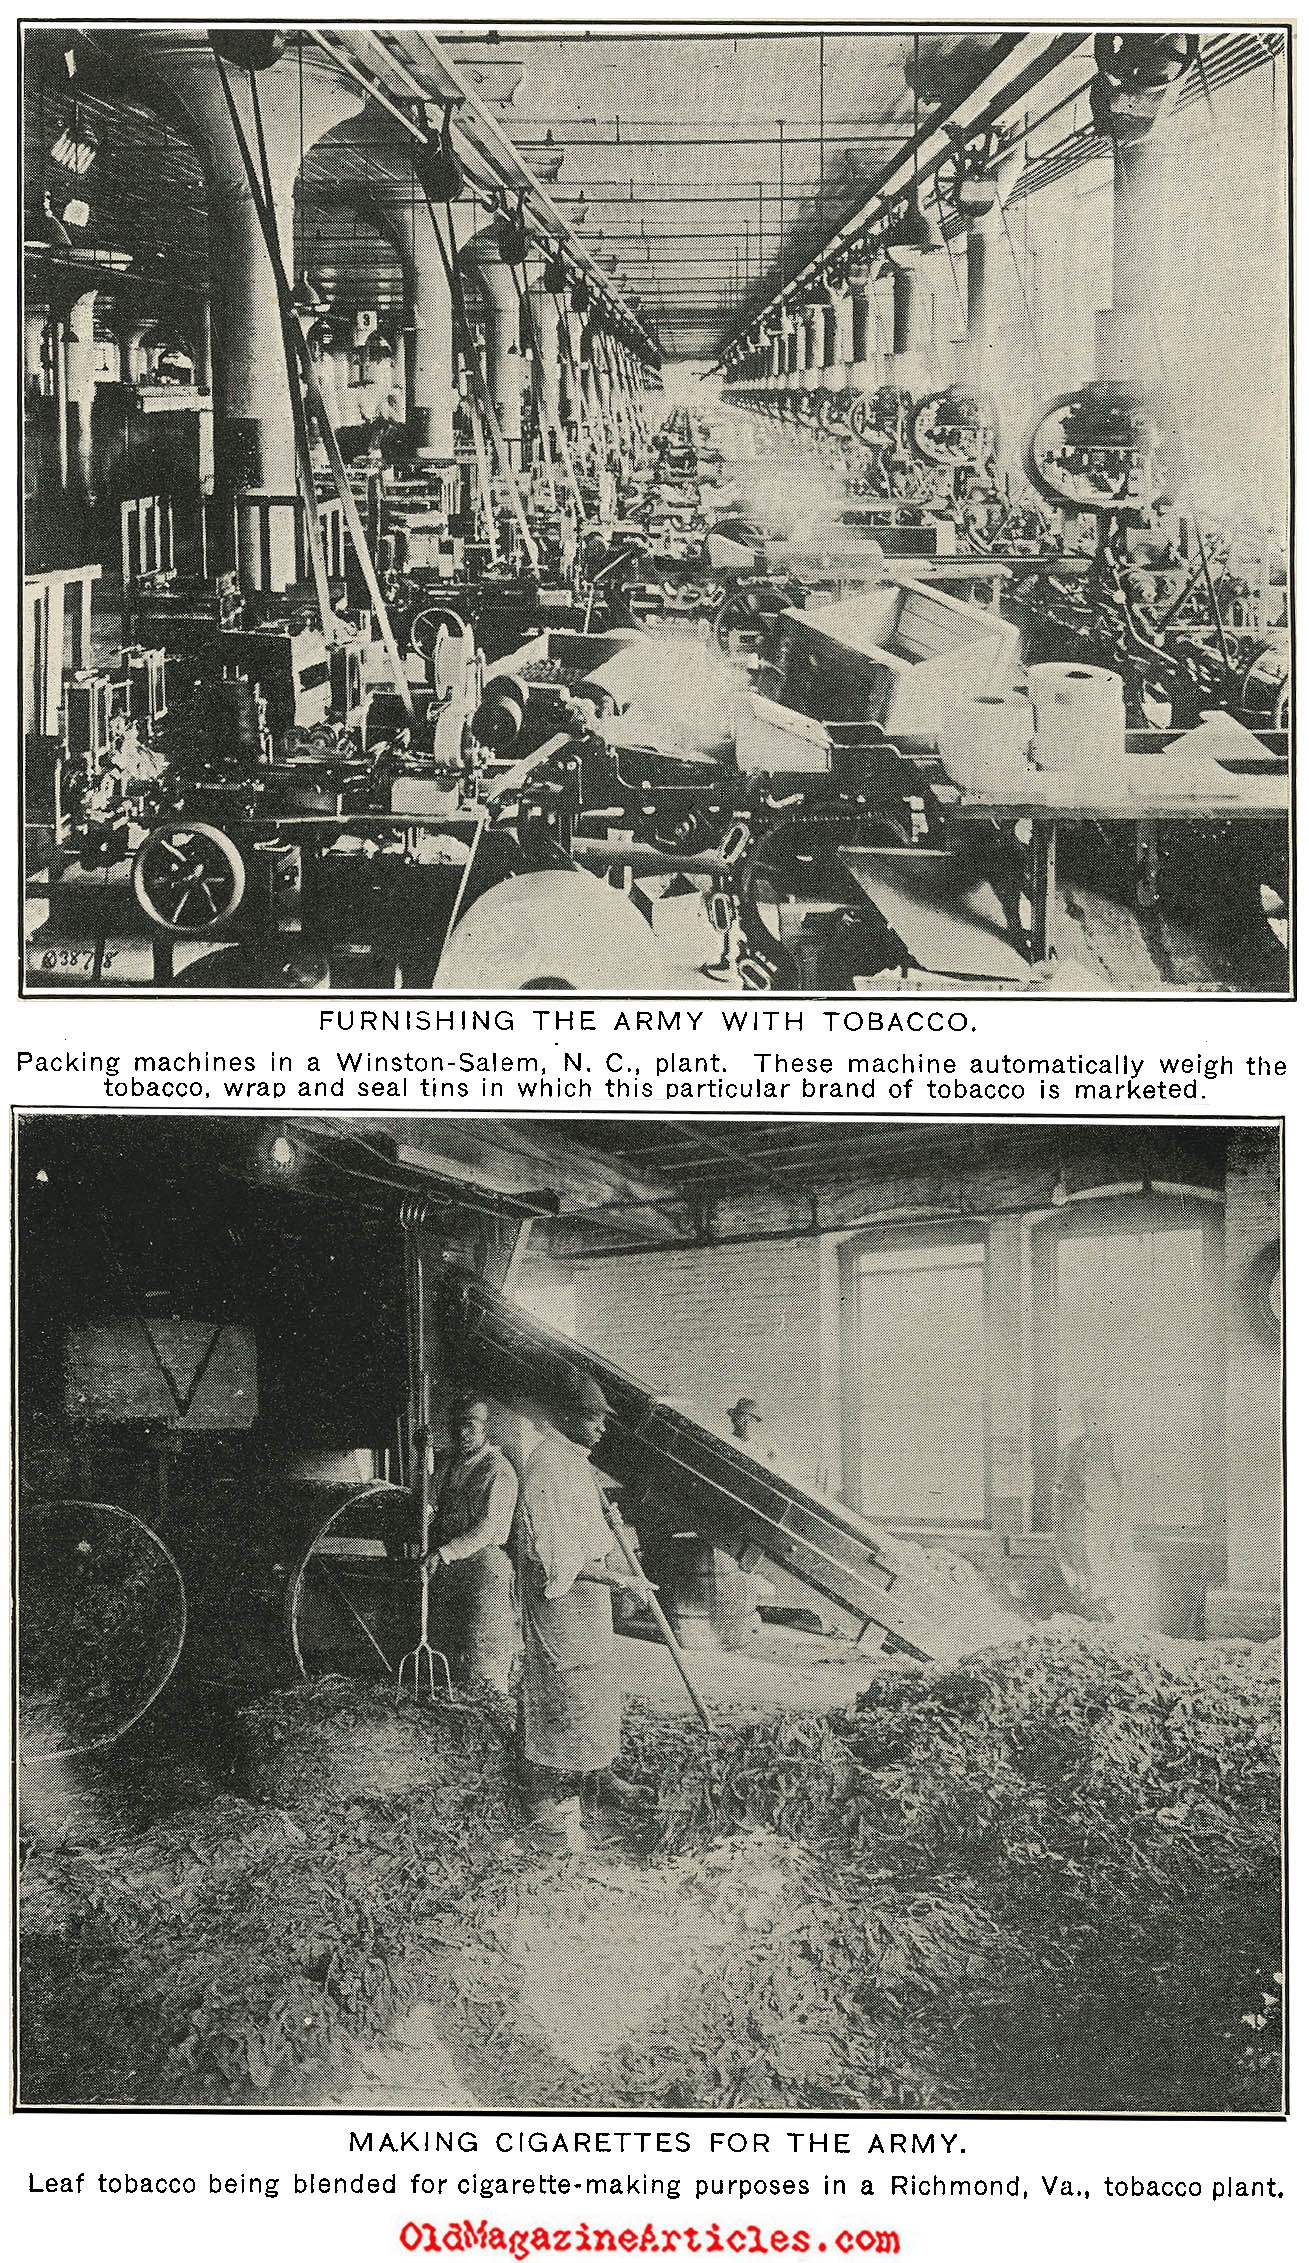 Supplying Tobacco to the AEF (America's Munitions, 1919)